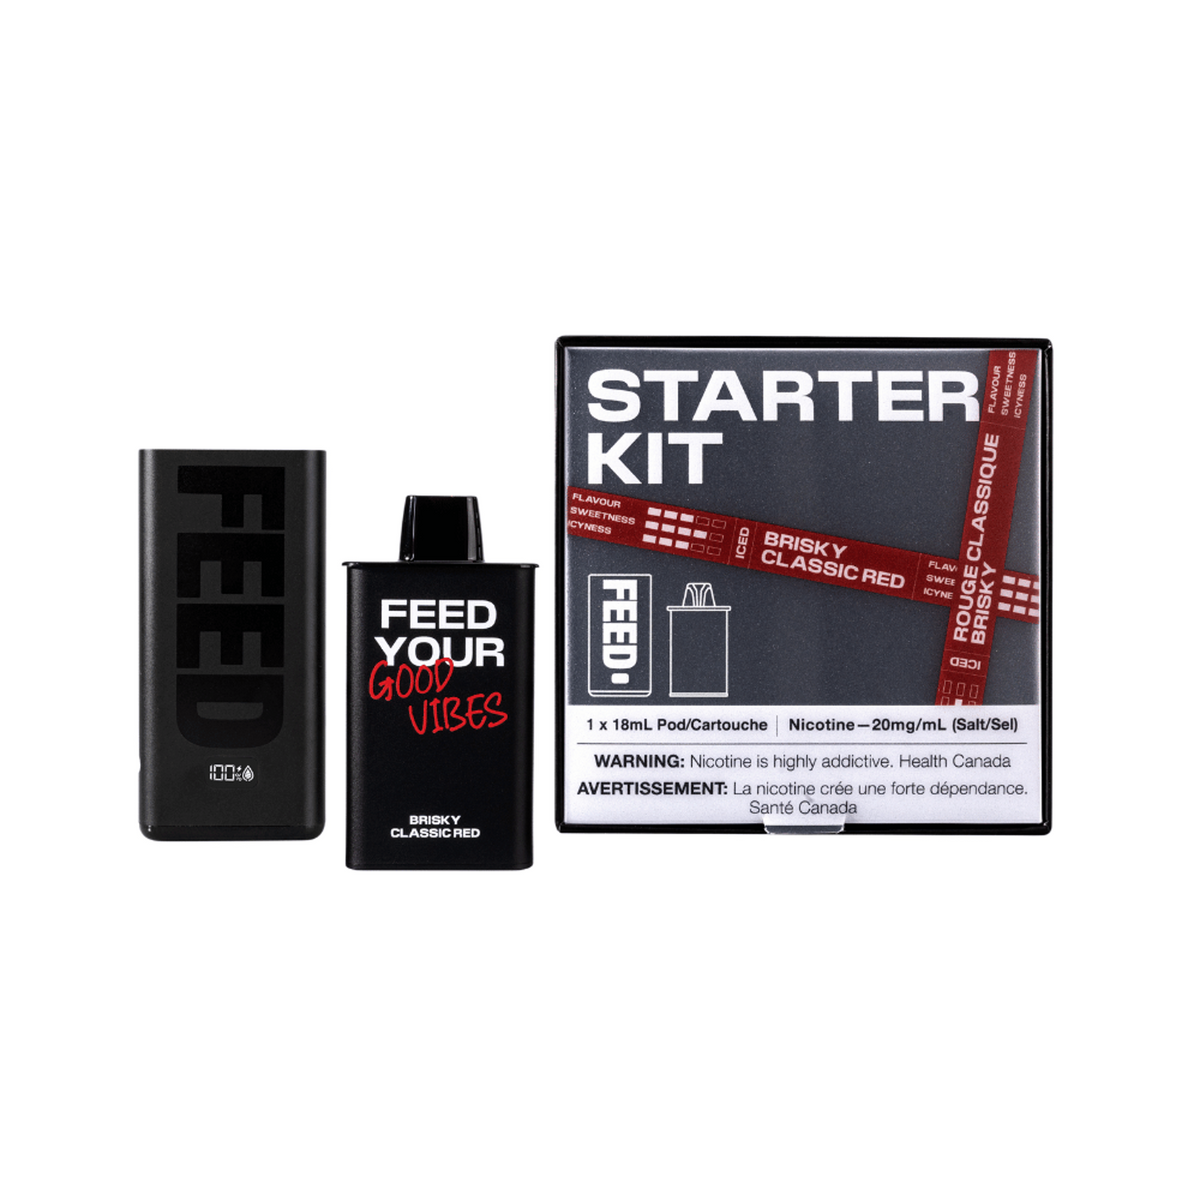 BRISKY CLASSIC RED STARTER KIT- FEED